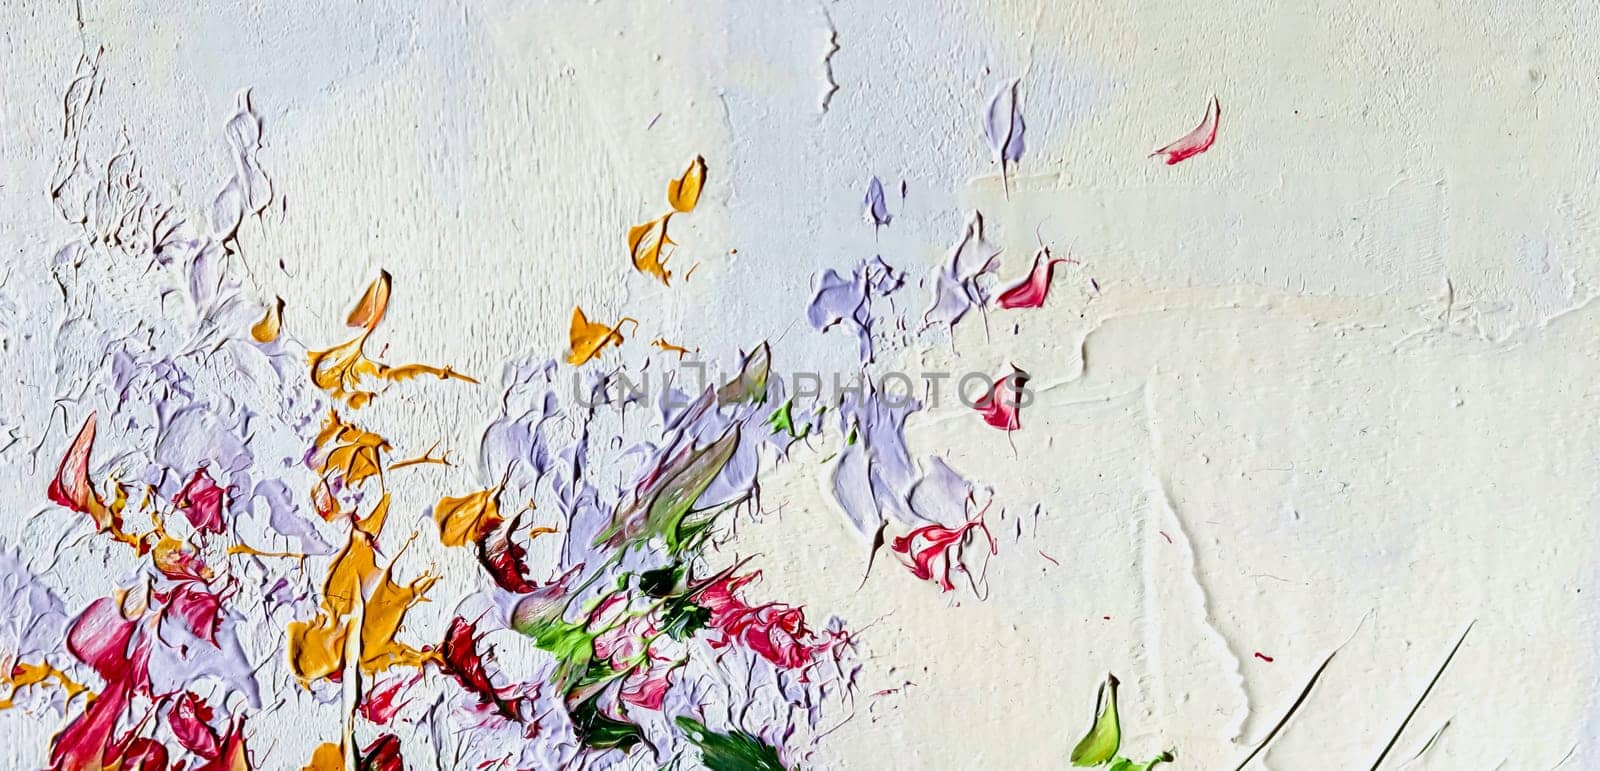 Abstract background - oil painting on canvas with flowers and paint strokes. Fragment of Modern artwork.